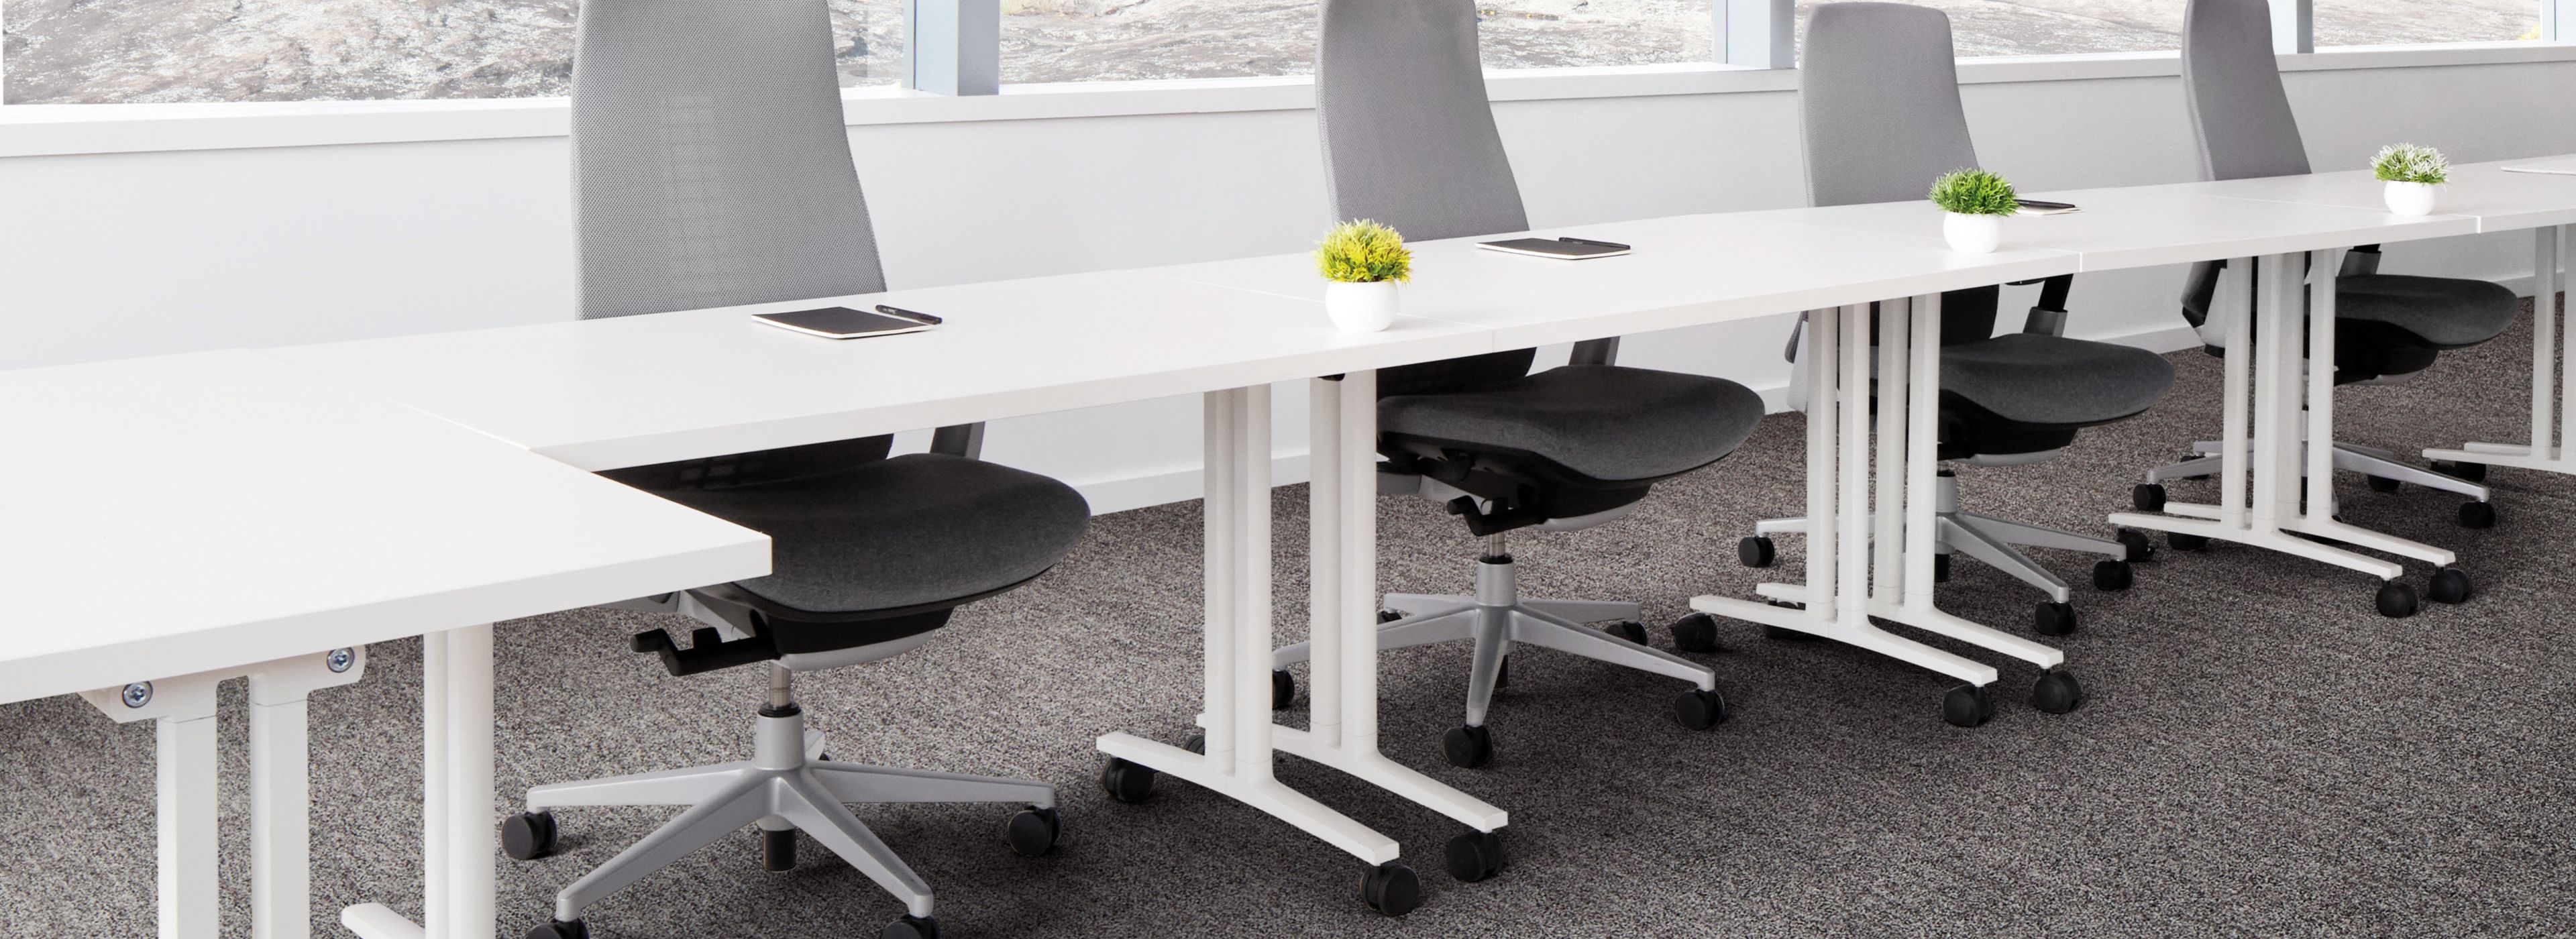 Interface Mantle Rock plank carpet tile in meeting room with white table imagen número 1